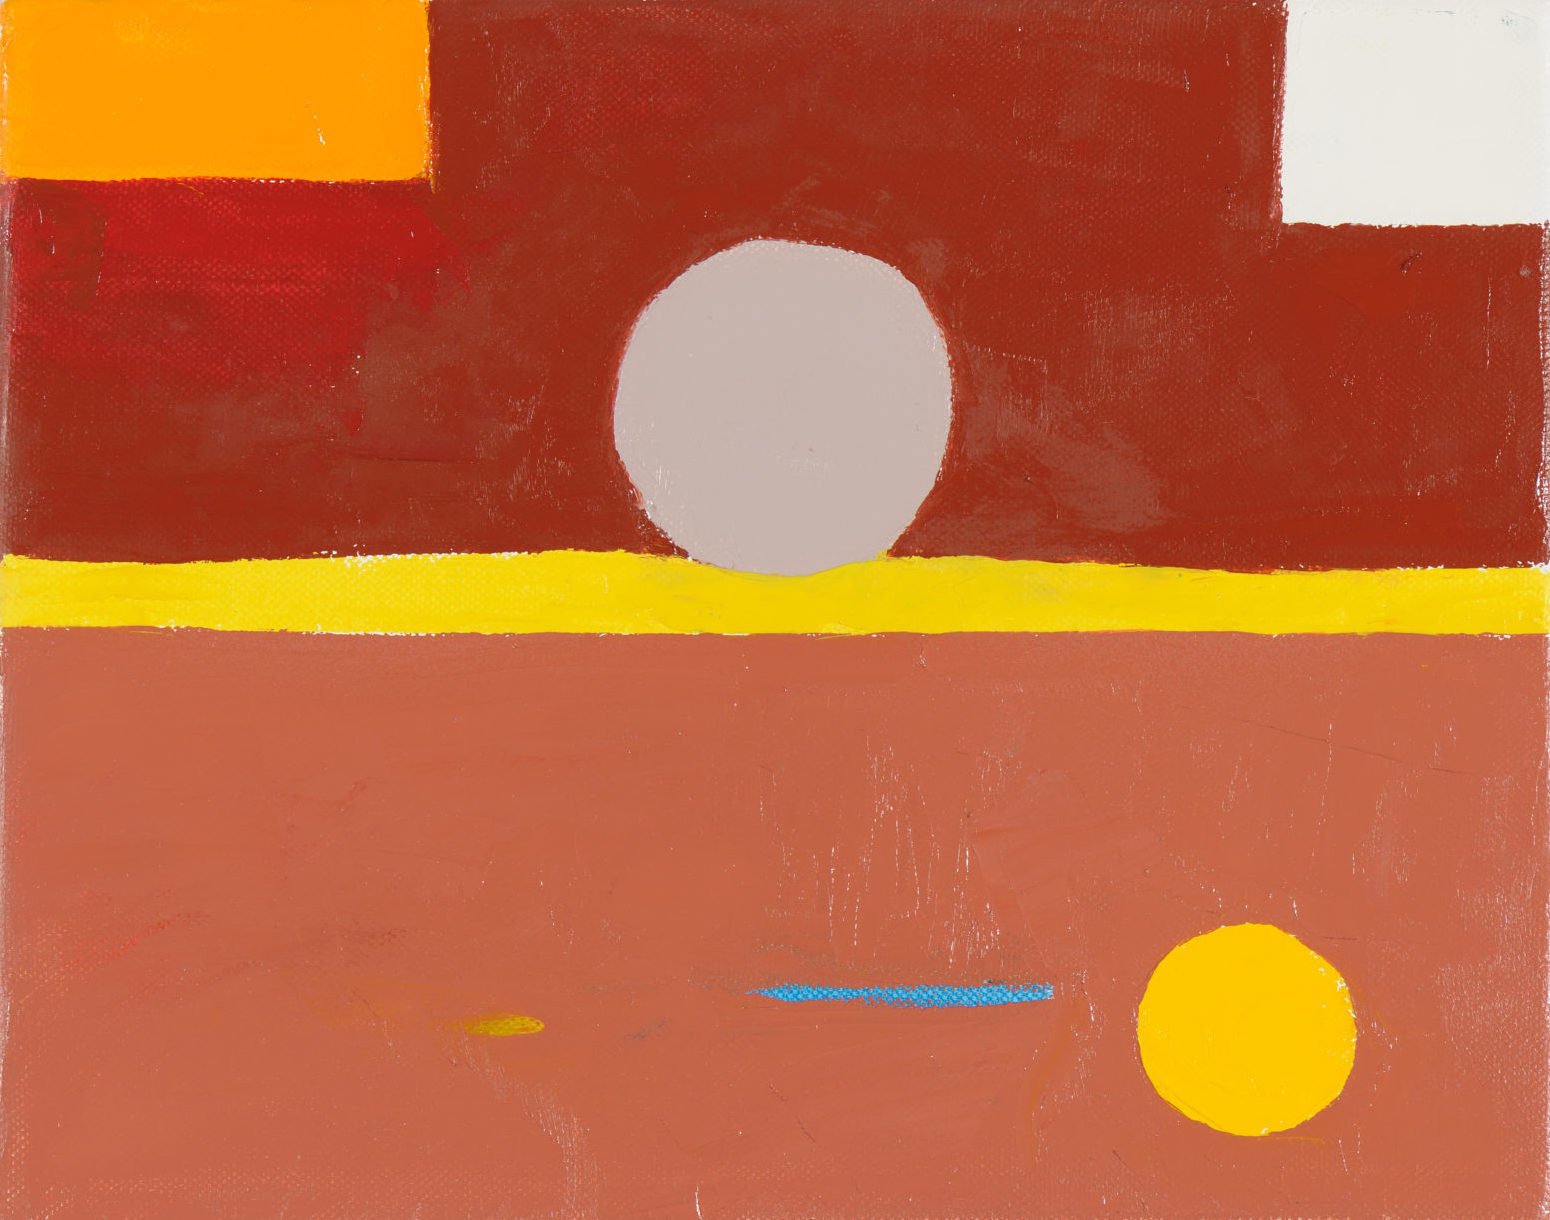 An abstract oil painting in shades of red, yellow, and orange.